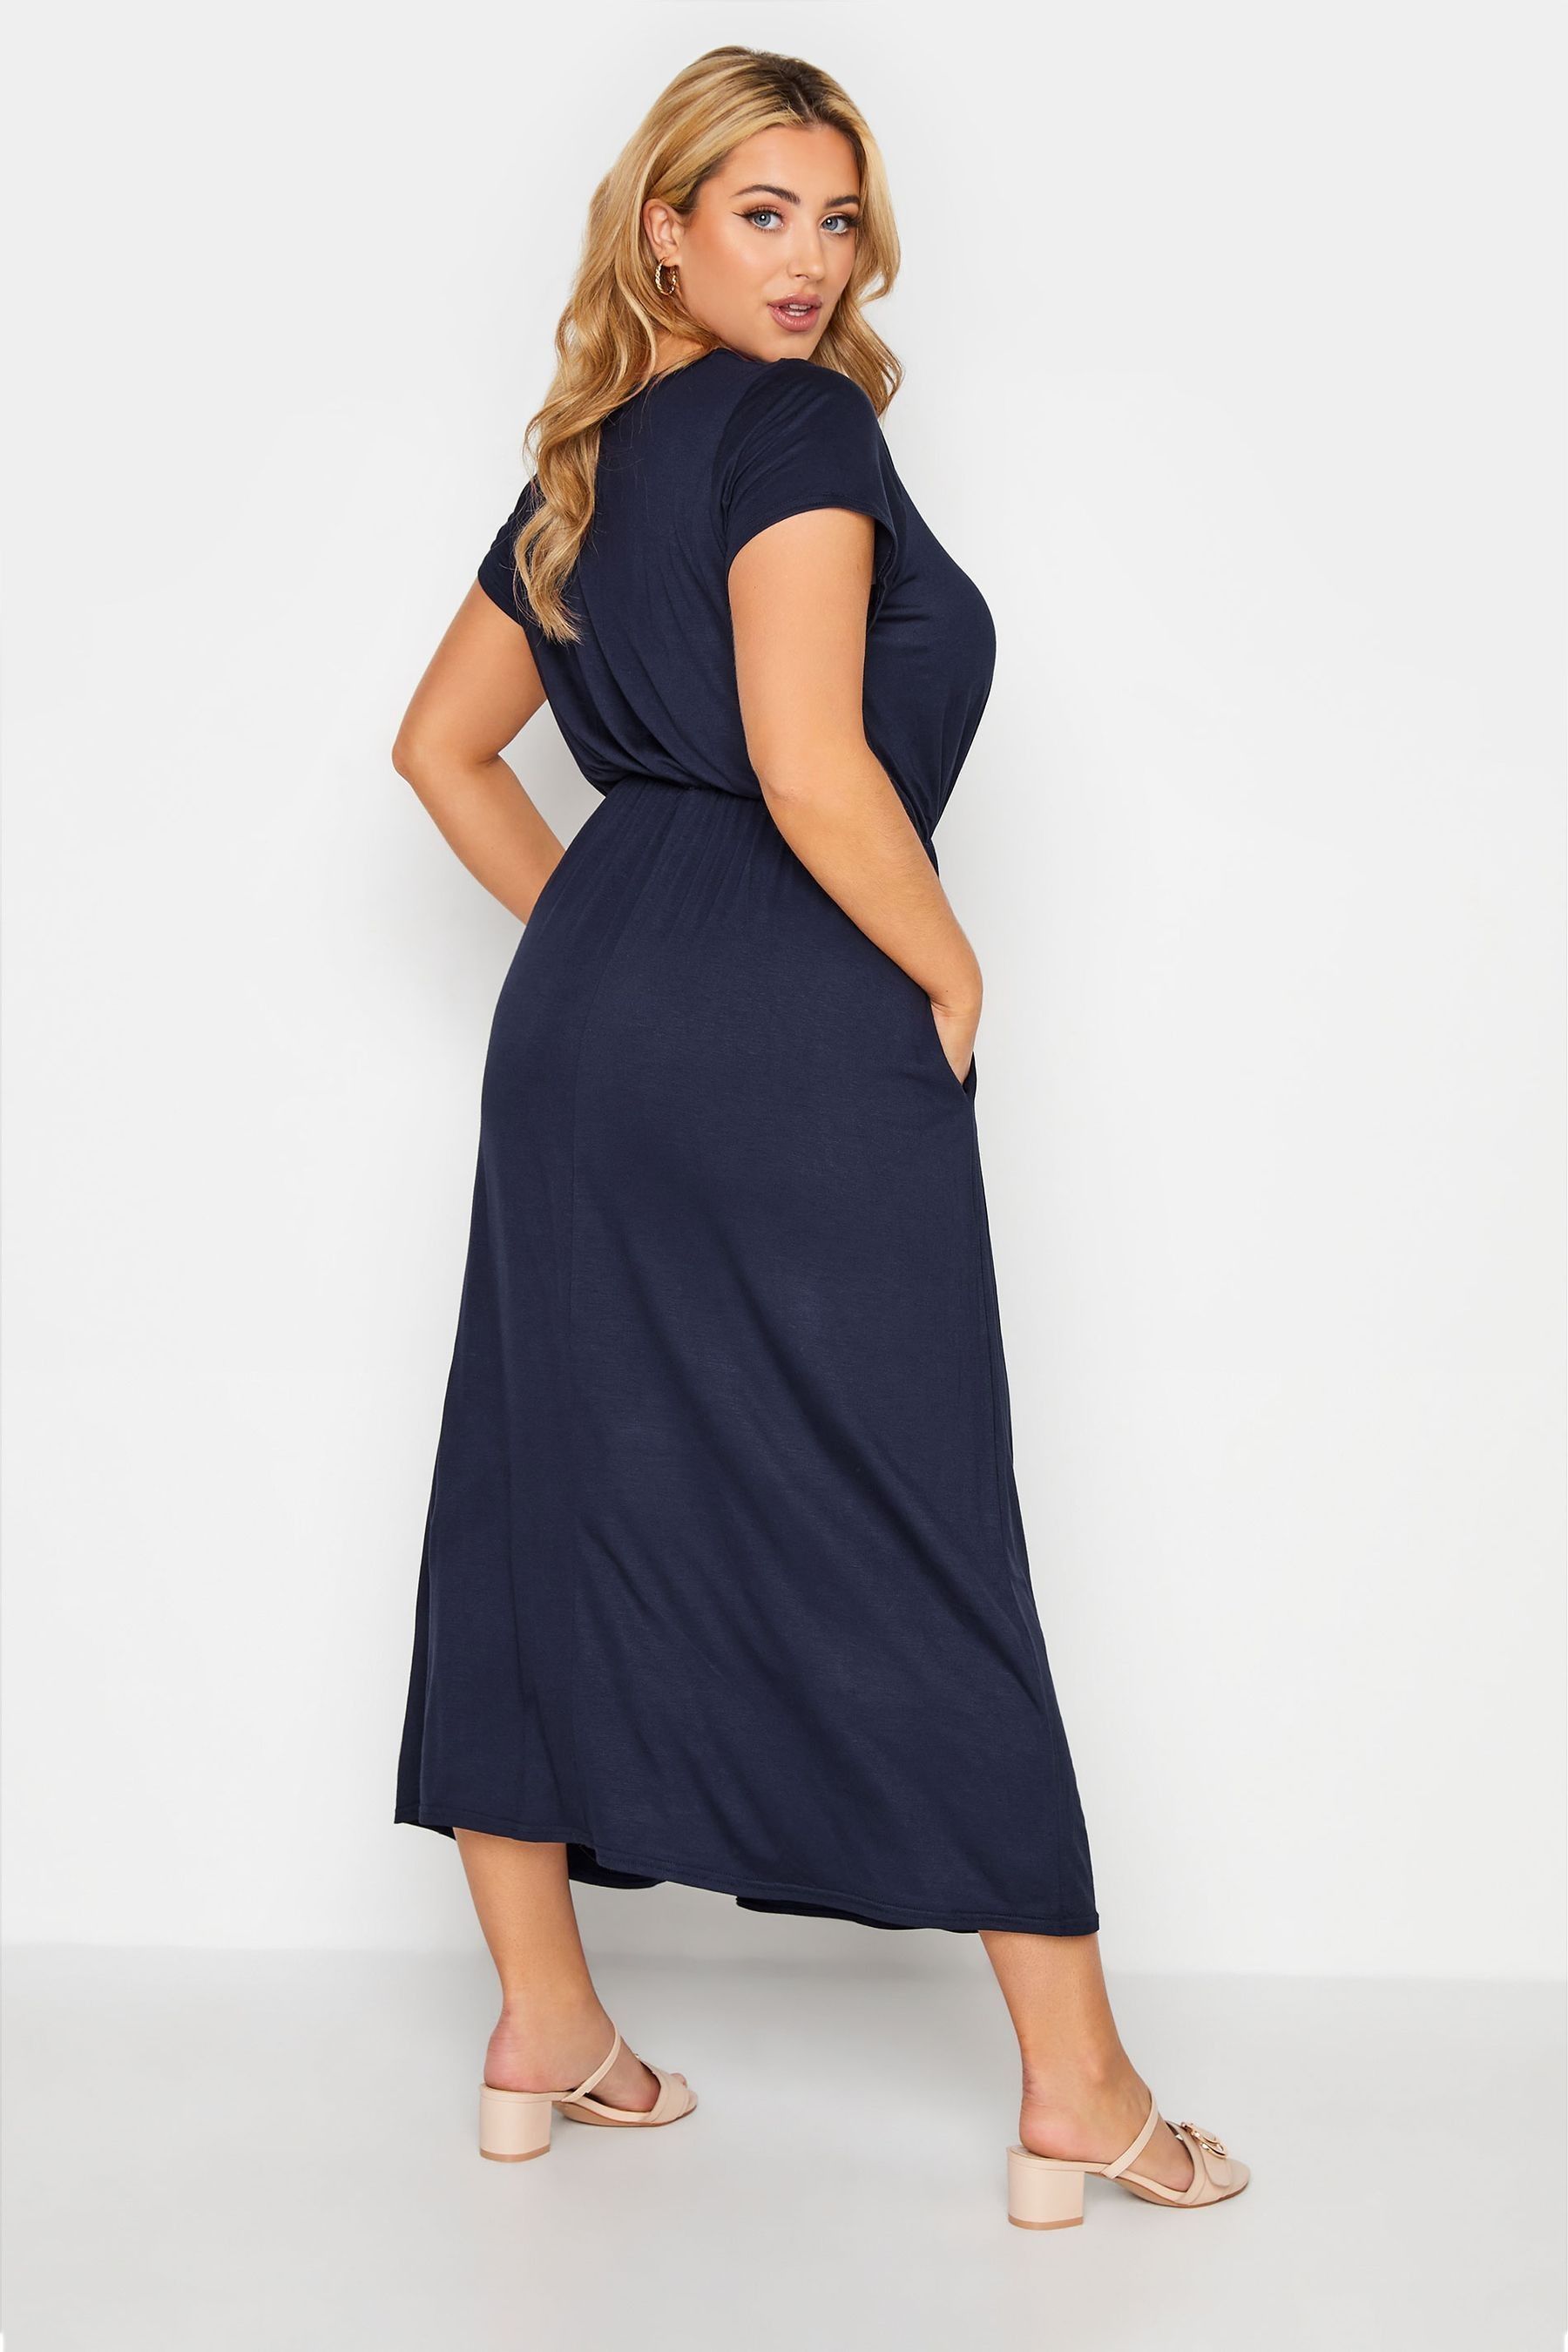 Buy Yours Curve Navy London Pocket Maxi Dress from the Next UK online shop